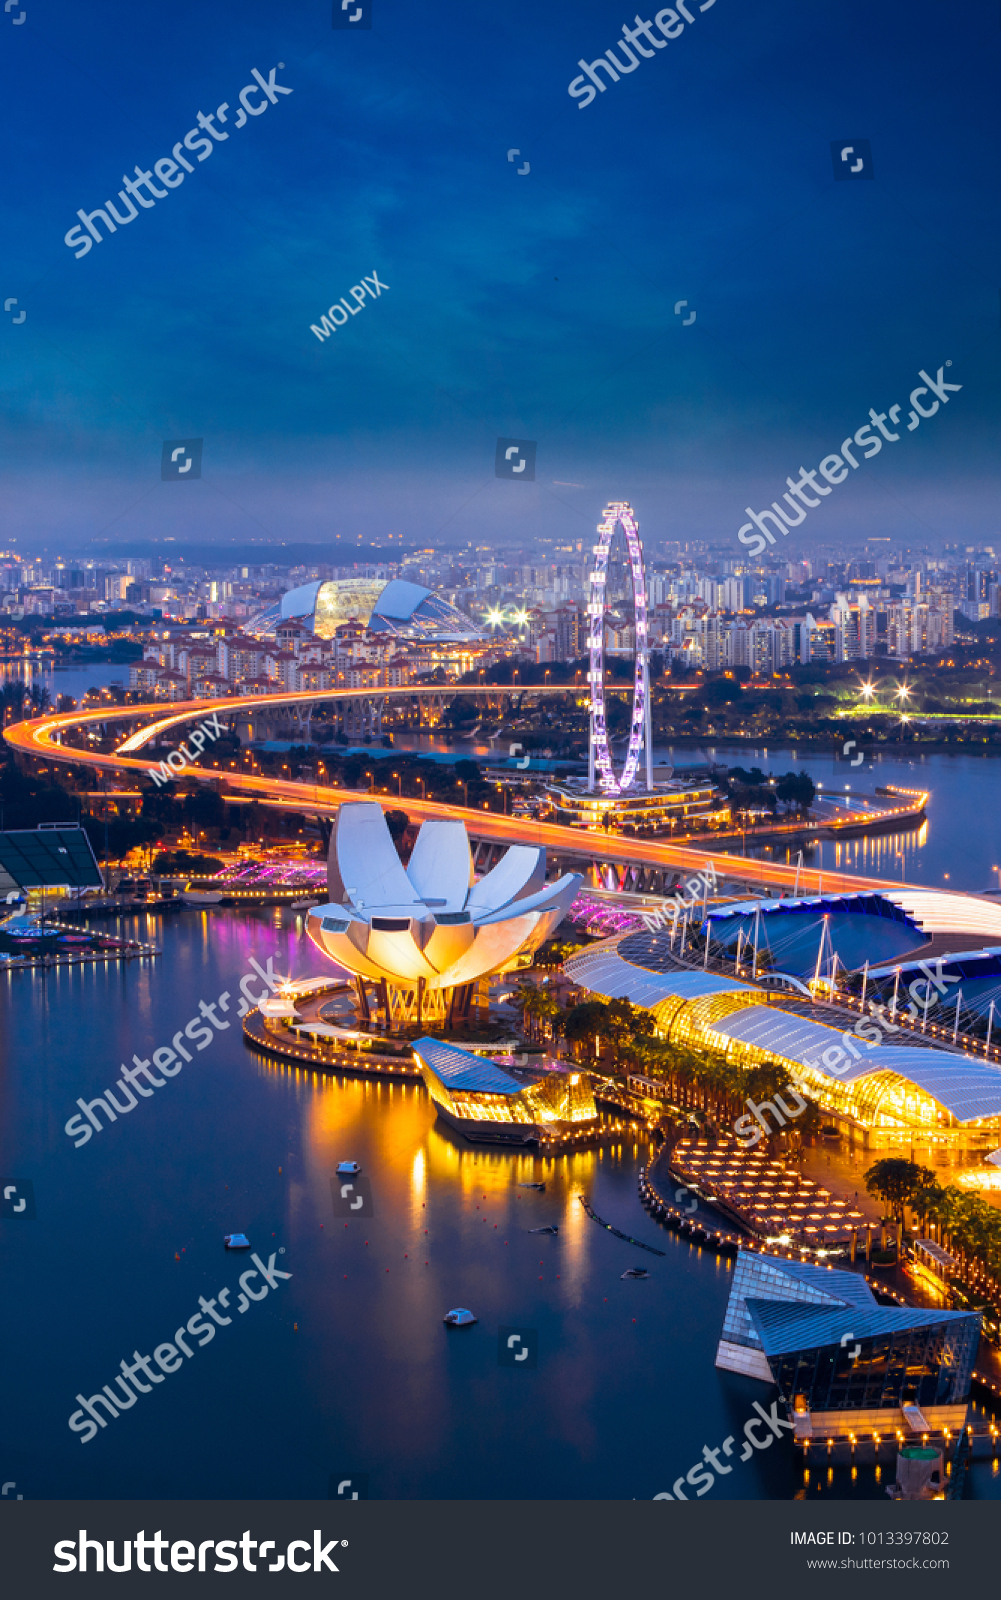 Singapore cityscape at dusk. Landscape of Singapore business building around Marina bay. Aerial view of modern high building in business district area at twilight. #1013397802